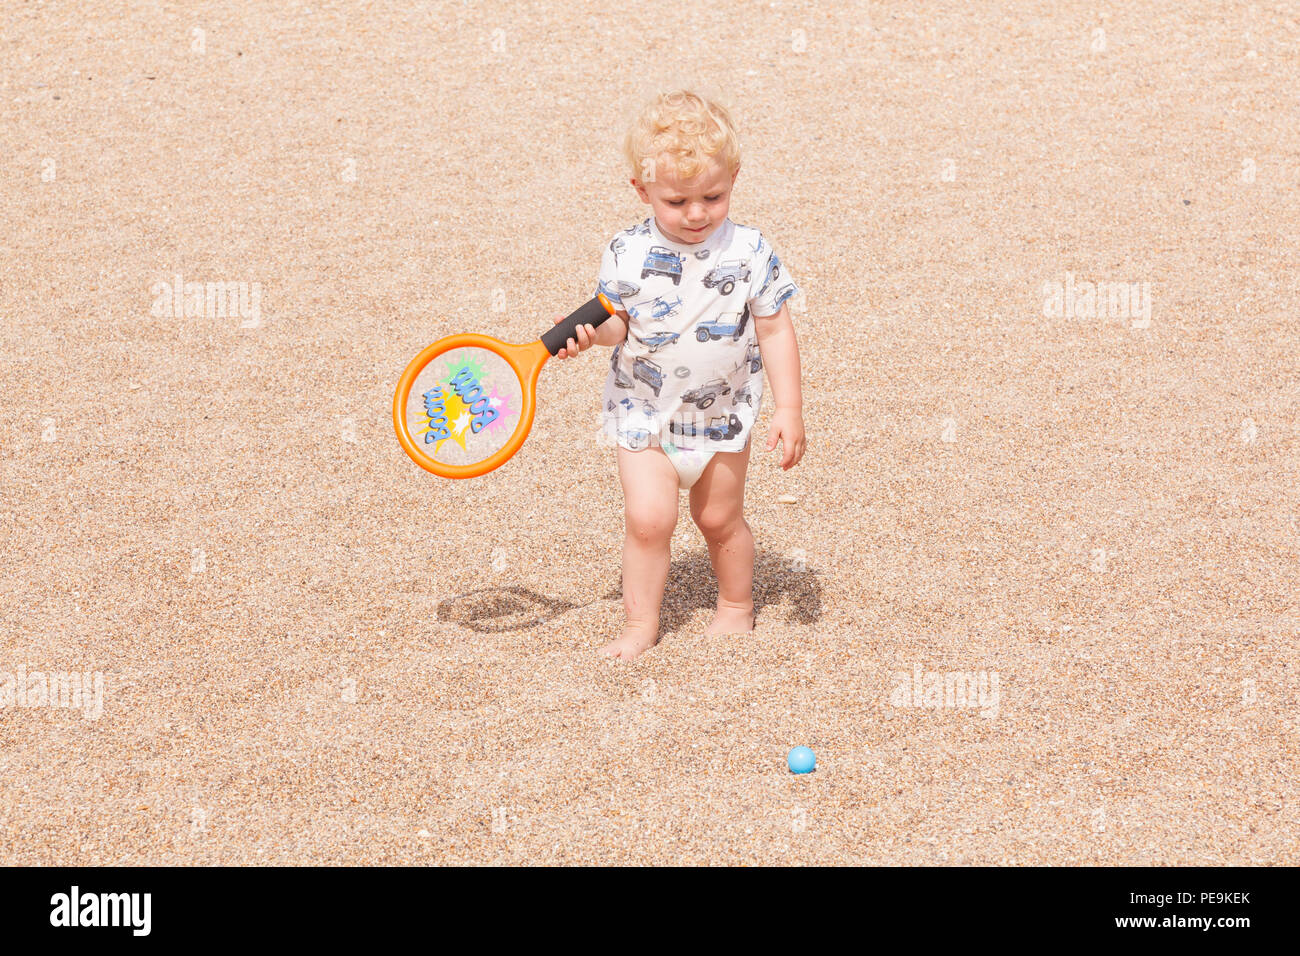 Two year old boy playing with a bat and ball, Devon, England, United Kingdom. Stock Photo